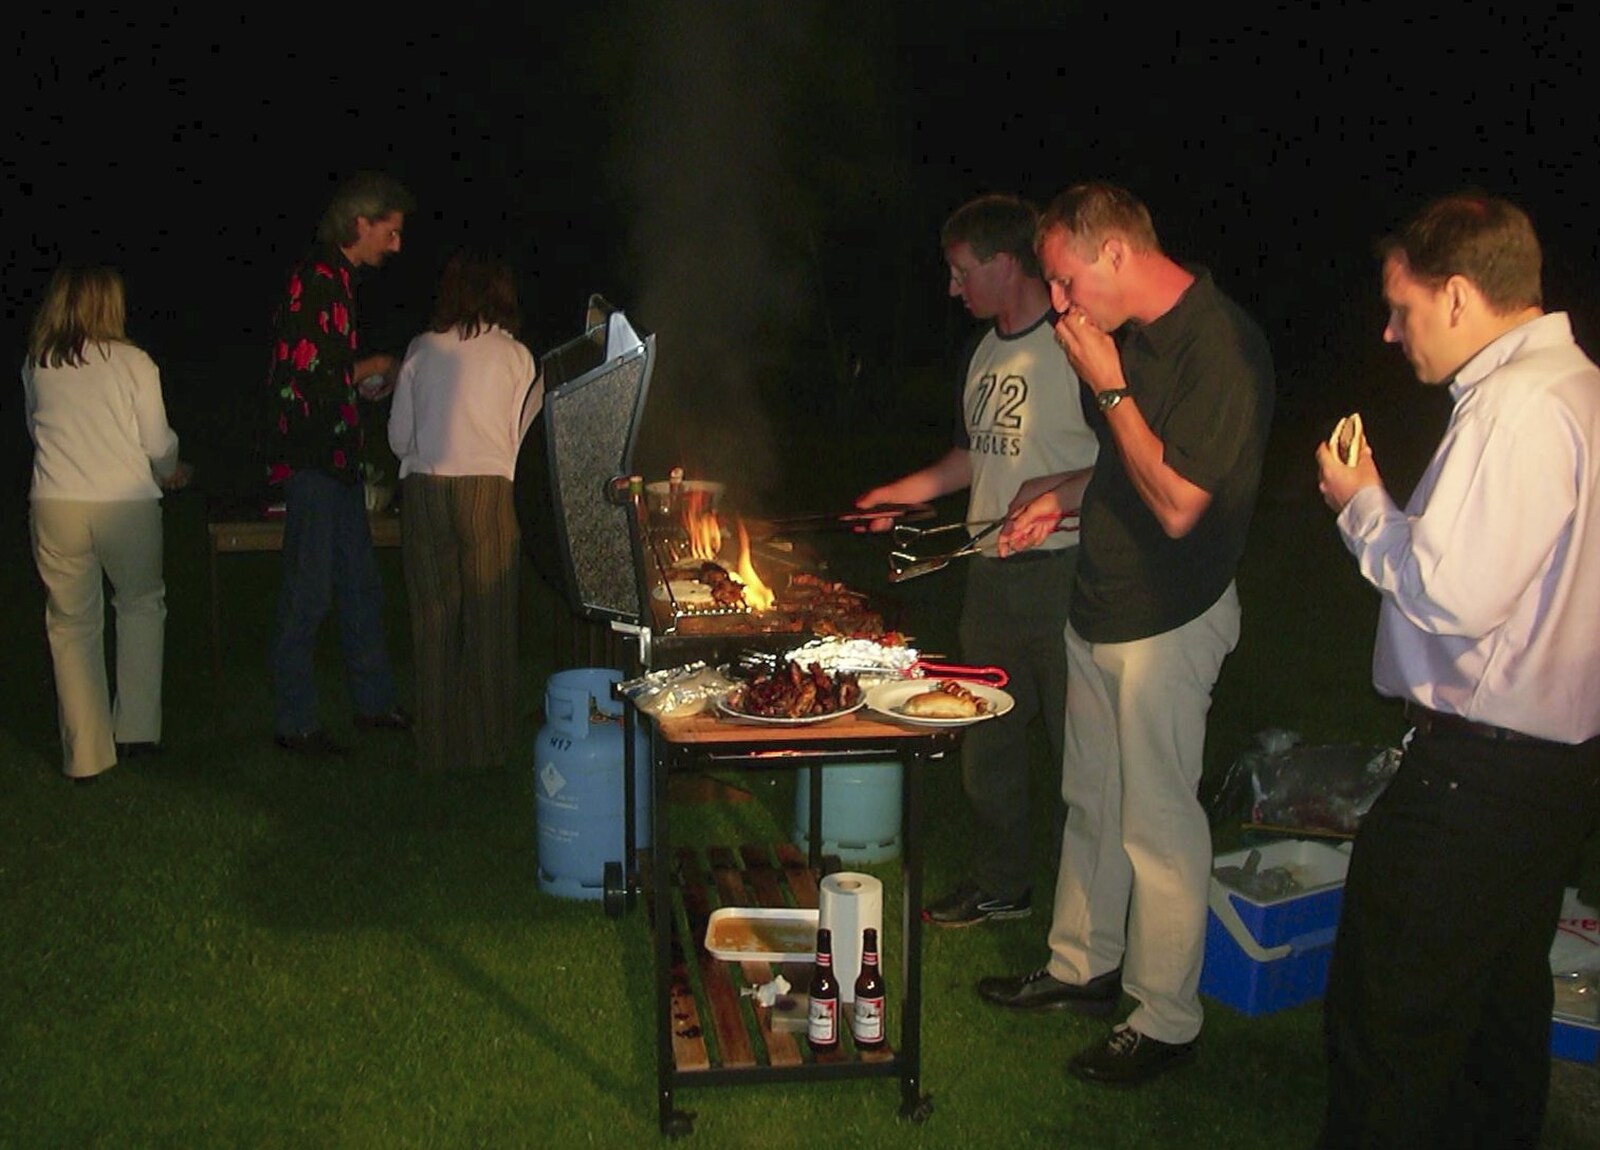 There's a barbeque after the gig from The BBs at BOCM Pauls Pavillion, Burston, Norfolk - 20th May 2003